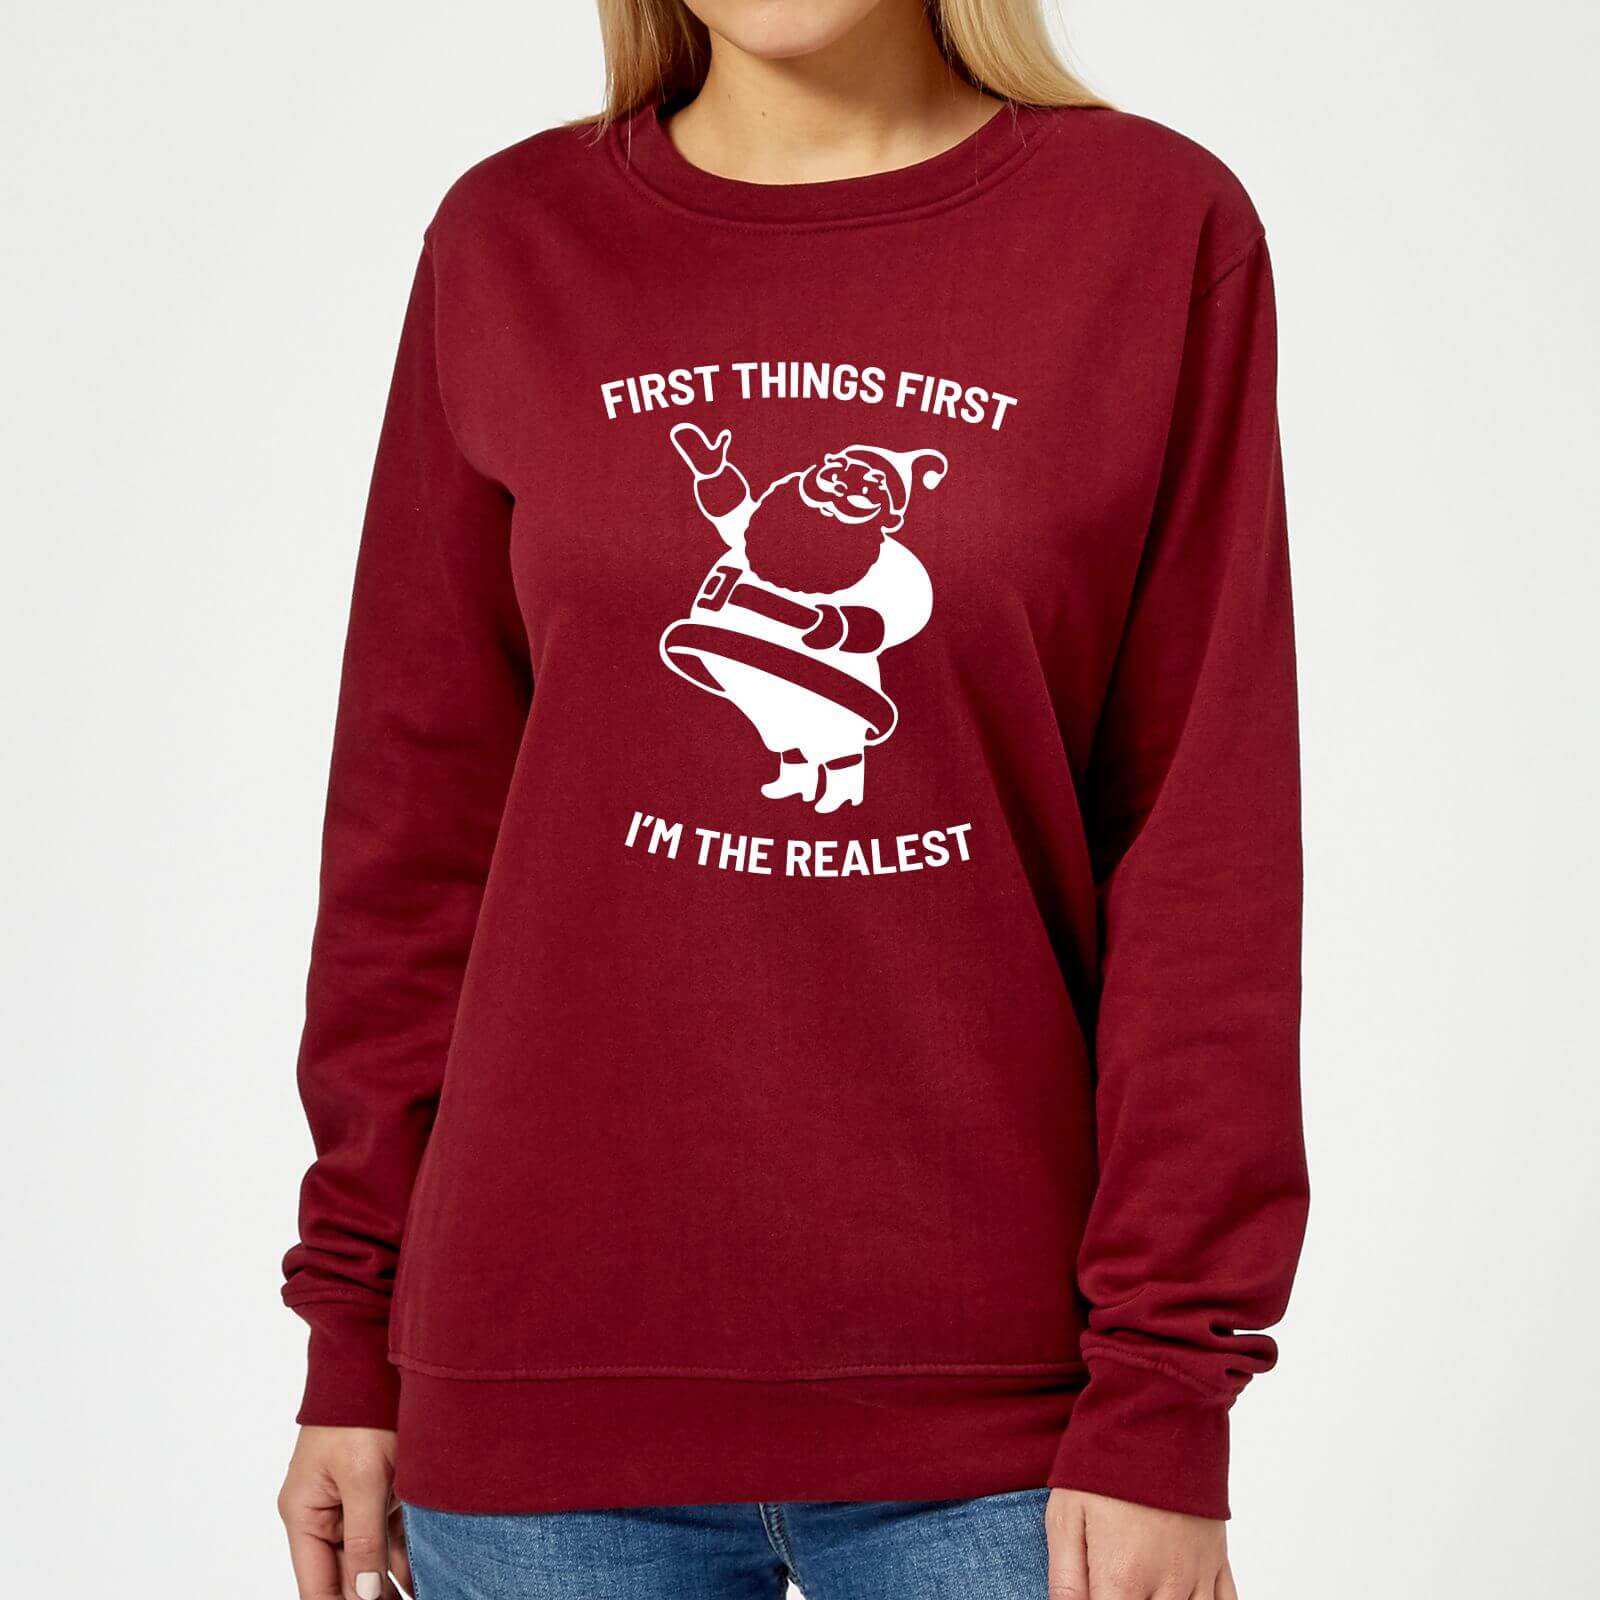 First Things First I'm The Realest Women's Christmas Sweatshirt - Burgundy - XS - Burgundy